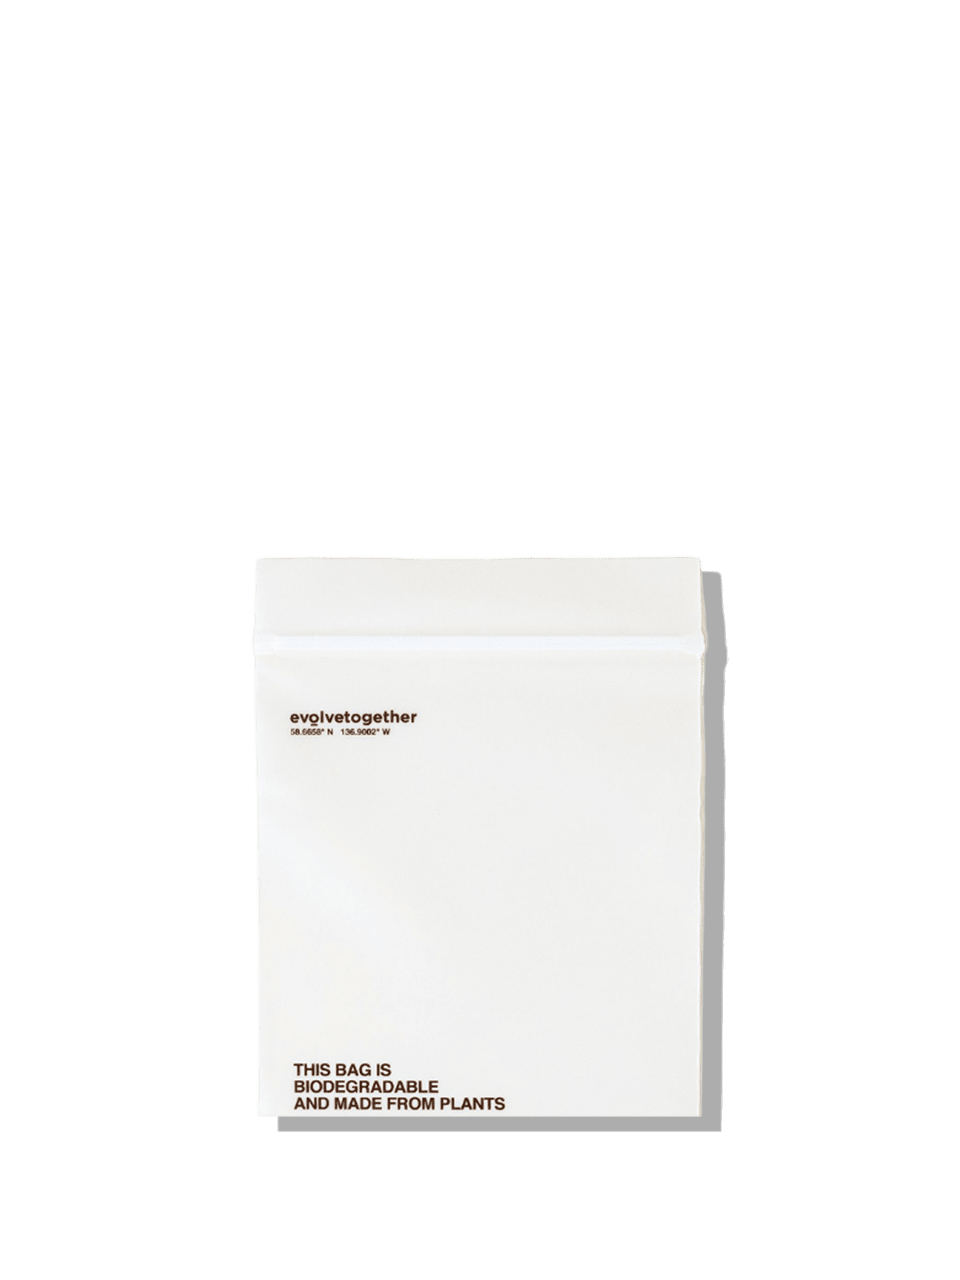 Glacier Gray Biodegradable Storage Bags LIFESTYLE evolvetogether Small / 32-Pack 